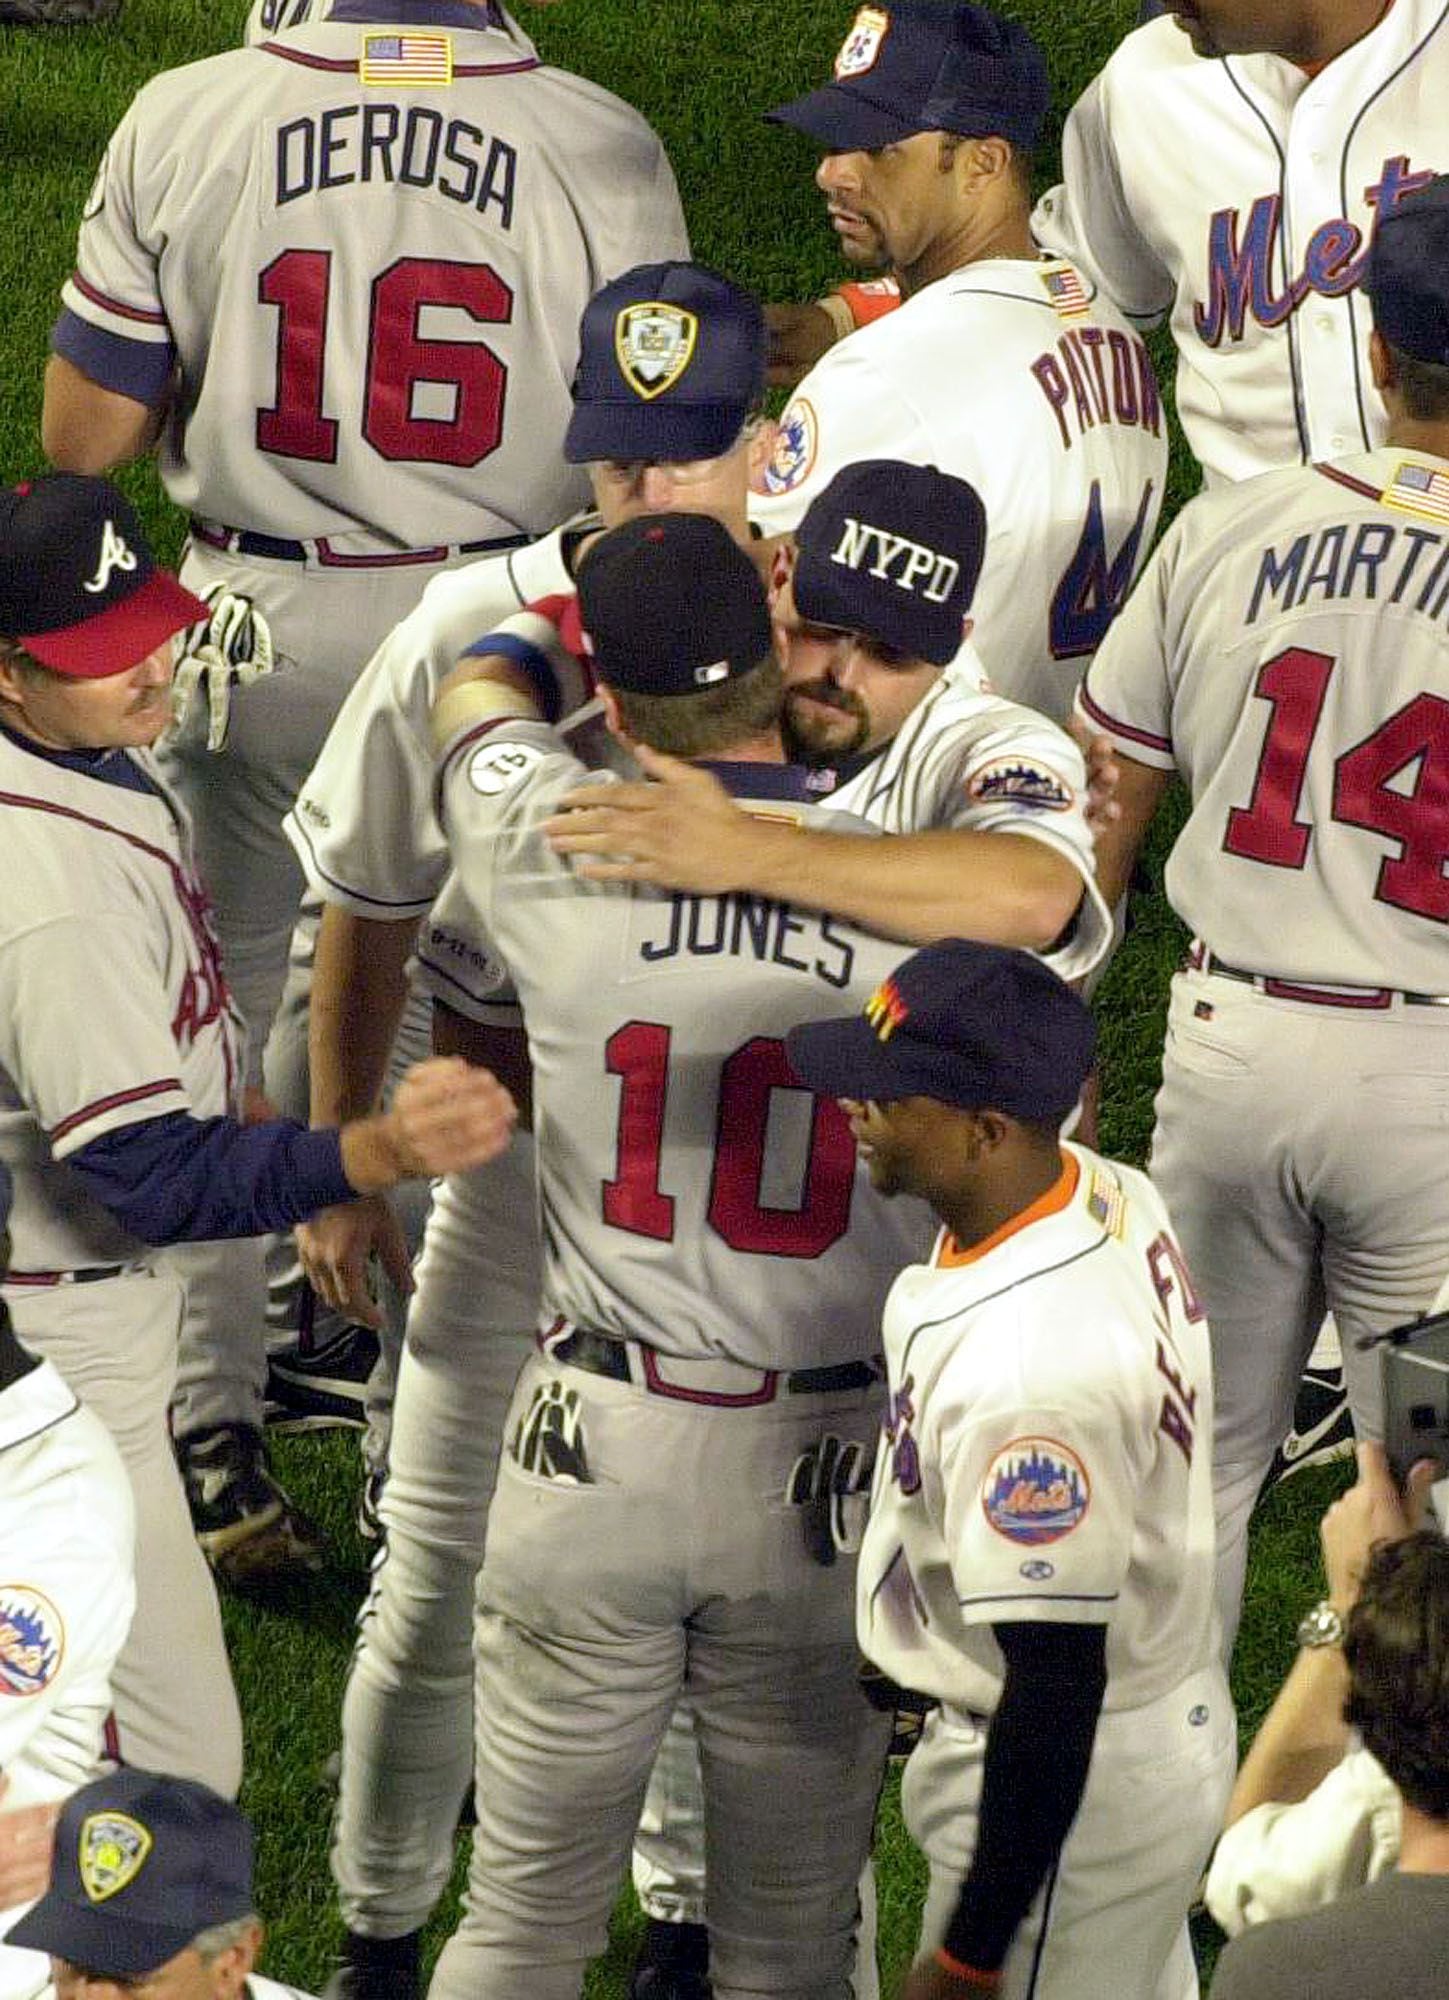 9/11 20 years later: Much more than a game – a look back at magical night  reminds us how sports helped